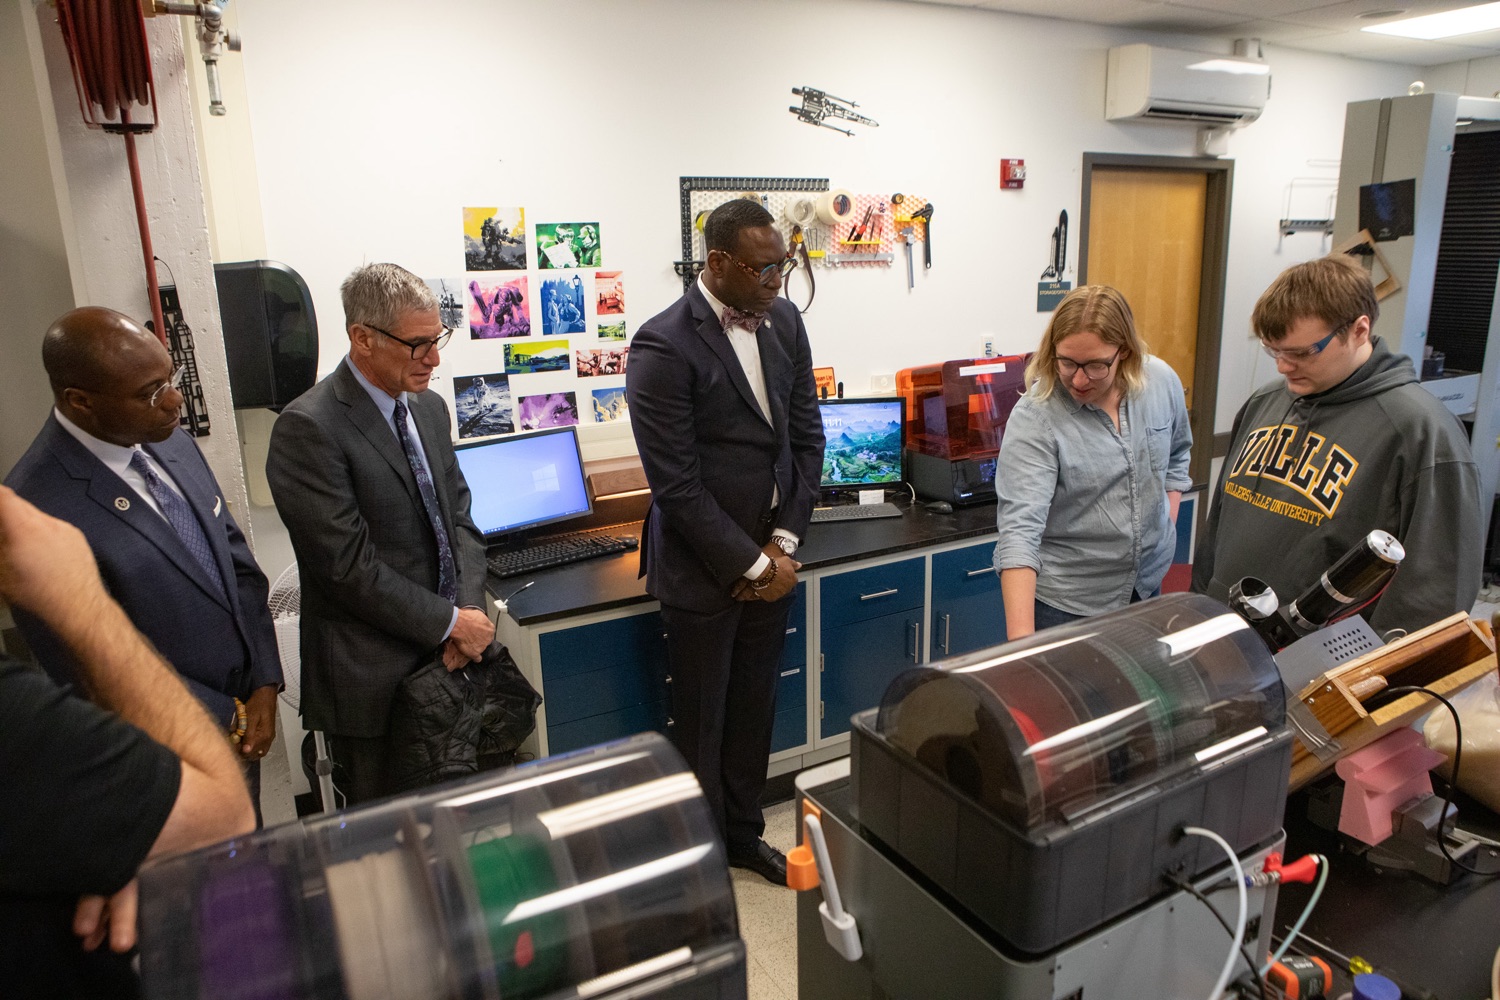 PDE Secretary Dr. Khalid N. Mumin takes a tour of the 3D printing area and learned how Millersville students are leaving the university with an array of job opportunities in high-paying, high-demand careers. ..Pennsylvania Department of Education (PDE) Secretary Dr. Khalid N. Mumin and Deputy Secretary Dr. Kate Shaw joined Pennsylvania State System of Higher Education (PASSHE) Chancellor Dan Greenstein at Millersville University to highlight Governor Shapiros proposed investments in higher education and how Pennsylvanias public postsecondary system is preparing students to be workforce-ready upon graduation.. .Governor Shapiros blueprint for higher education will help Pennsylvanias public universities build on areas of strength and address the challenges caused by a 30-year disinvestment in higher education by the Commonwealth, such as competition between universities that results in higher costs and lower enrollment. Governor Shapiros blueprint will ensure better coordination across PASSHE universities and community colleges to expand access to affordable, workforce-ready credentials and degrees across Pennsylvania  including in areas that currently lack access.. .Our Commonwealths institutions of higher education, like Millersville University, do an incredible job preparing students for the future and connecting them with future opportunities, said Secretary Khalid N. Mumin. Governor Josh Shapiros new blueprint for higher education will end the era of disinvestment in our higher education sector, make postsecondary education more accessible and affordable to more Pennsylvanians, and allow these schools to continue to do what they do besteducate learners..<br><a href="https://filesource.amperwave.net/commonwealthofpa/photo/24436_PDE_Blueprint_ERD_046.jpg" target="_blank">⇣ Download Photo</a>